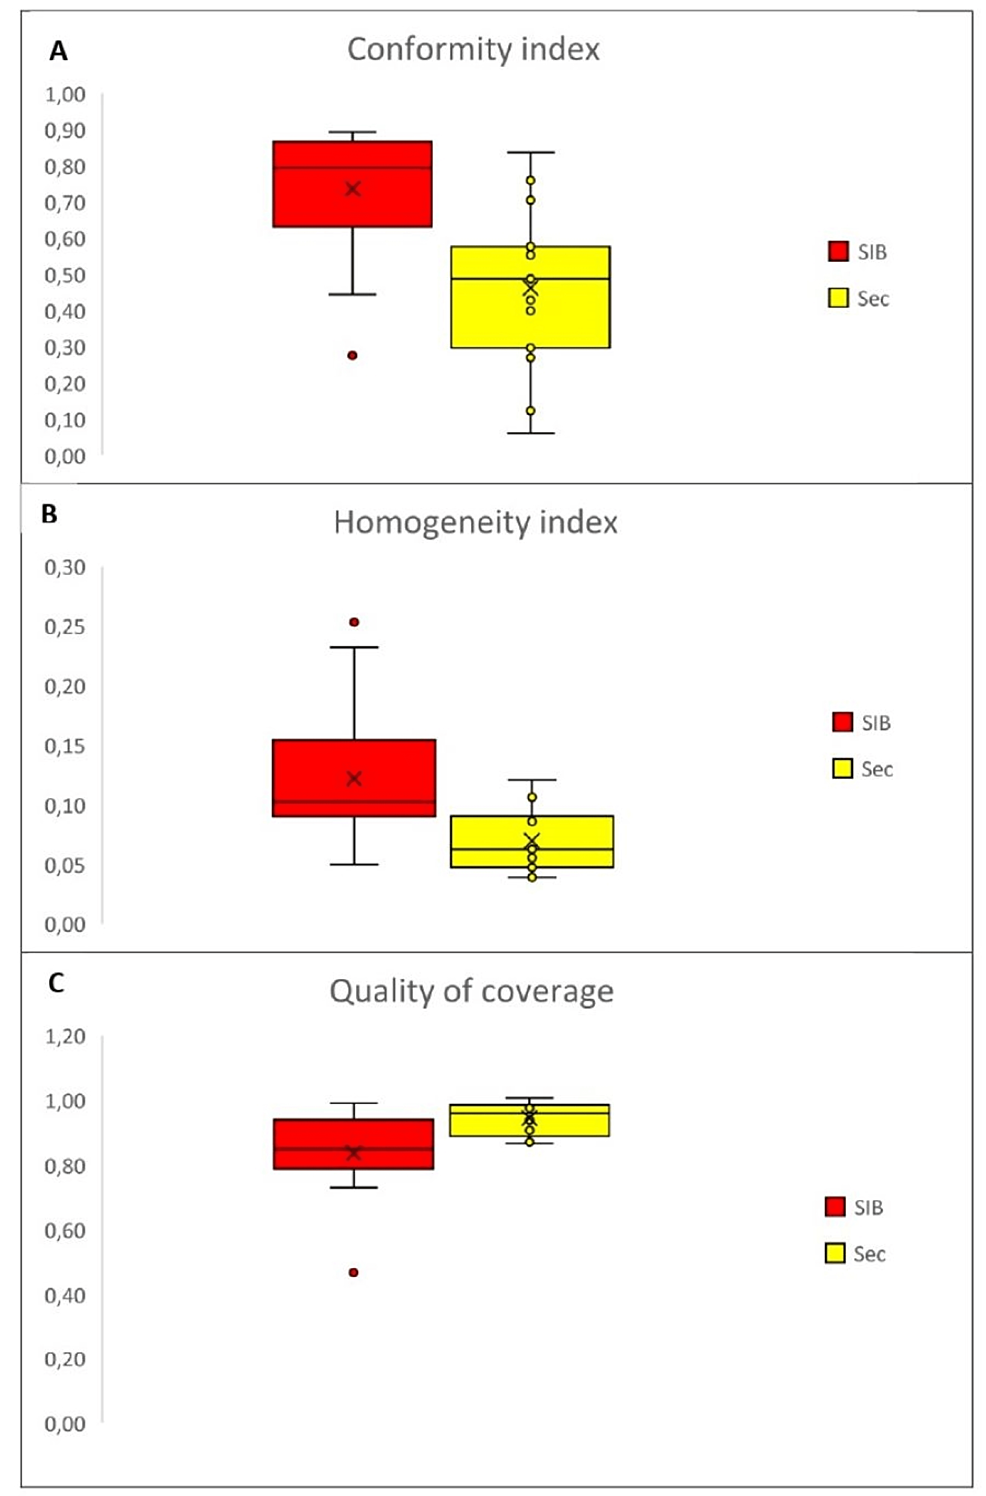 Box-plot-for-conformity-index-(A),-homogeneity-index-(B),-and-quality-of-coverage-(C)-by-treatment-technique